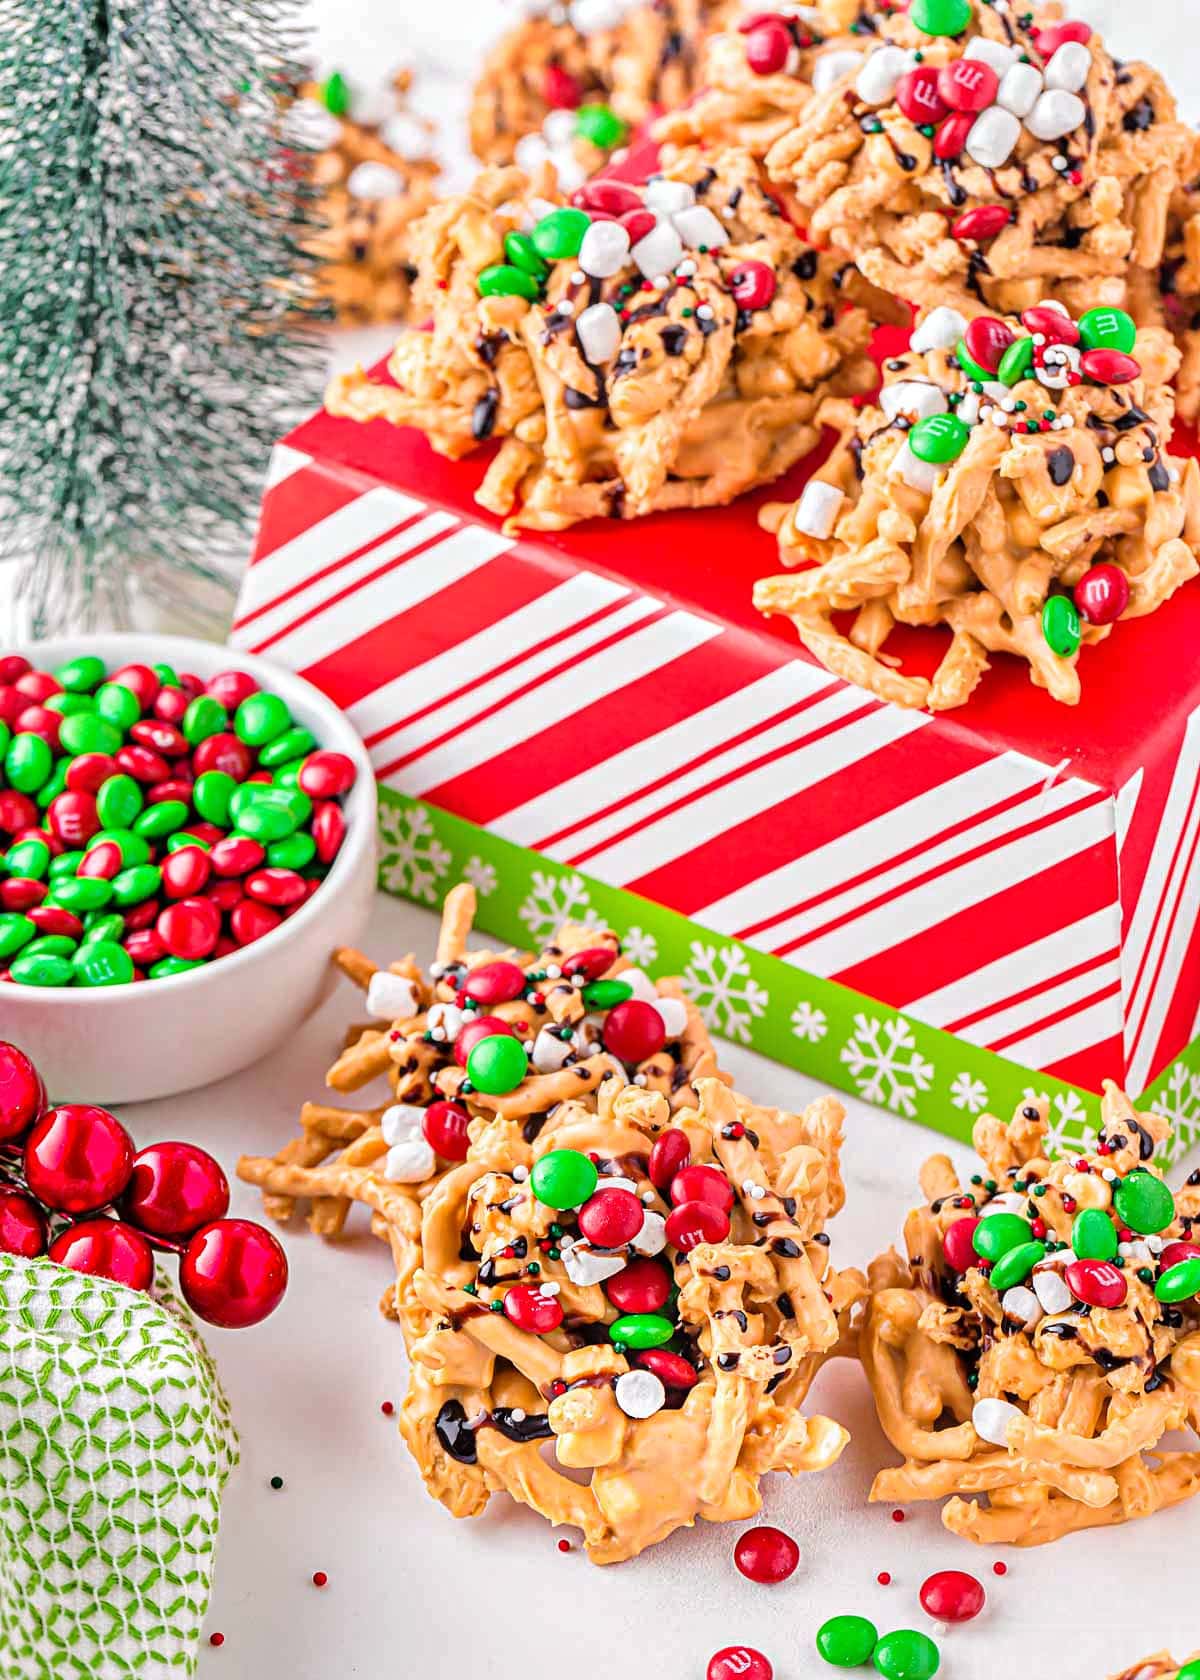 butterscotch haystacks all decorated for christmas sitting on and in front of a red and white striped christmas box. small bowl of red and green m and m candy siting next to the haystacks.